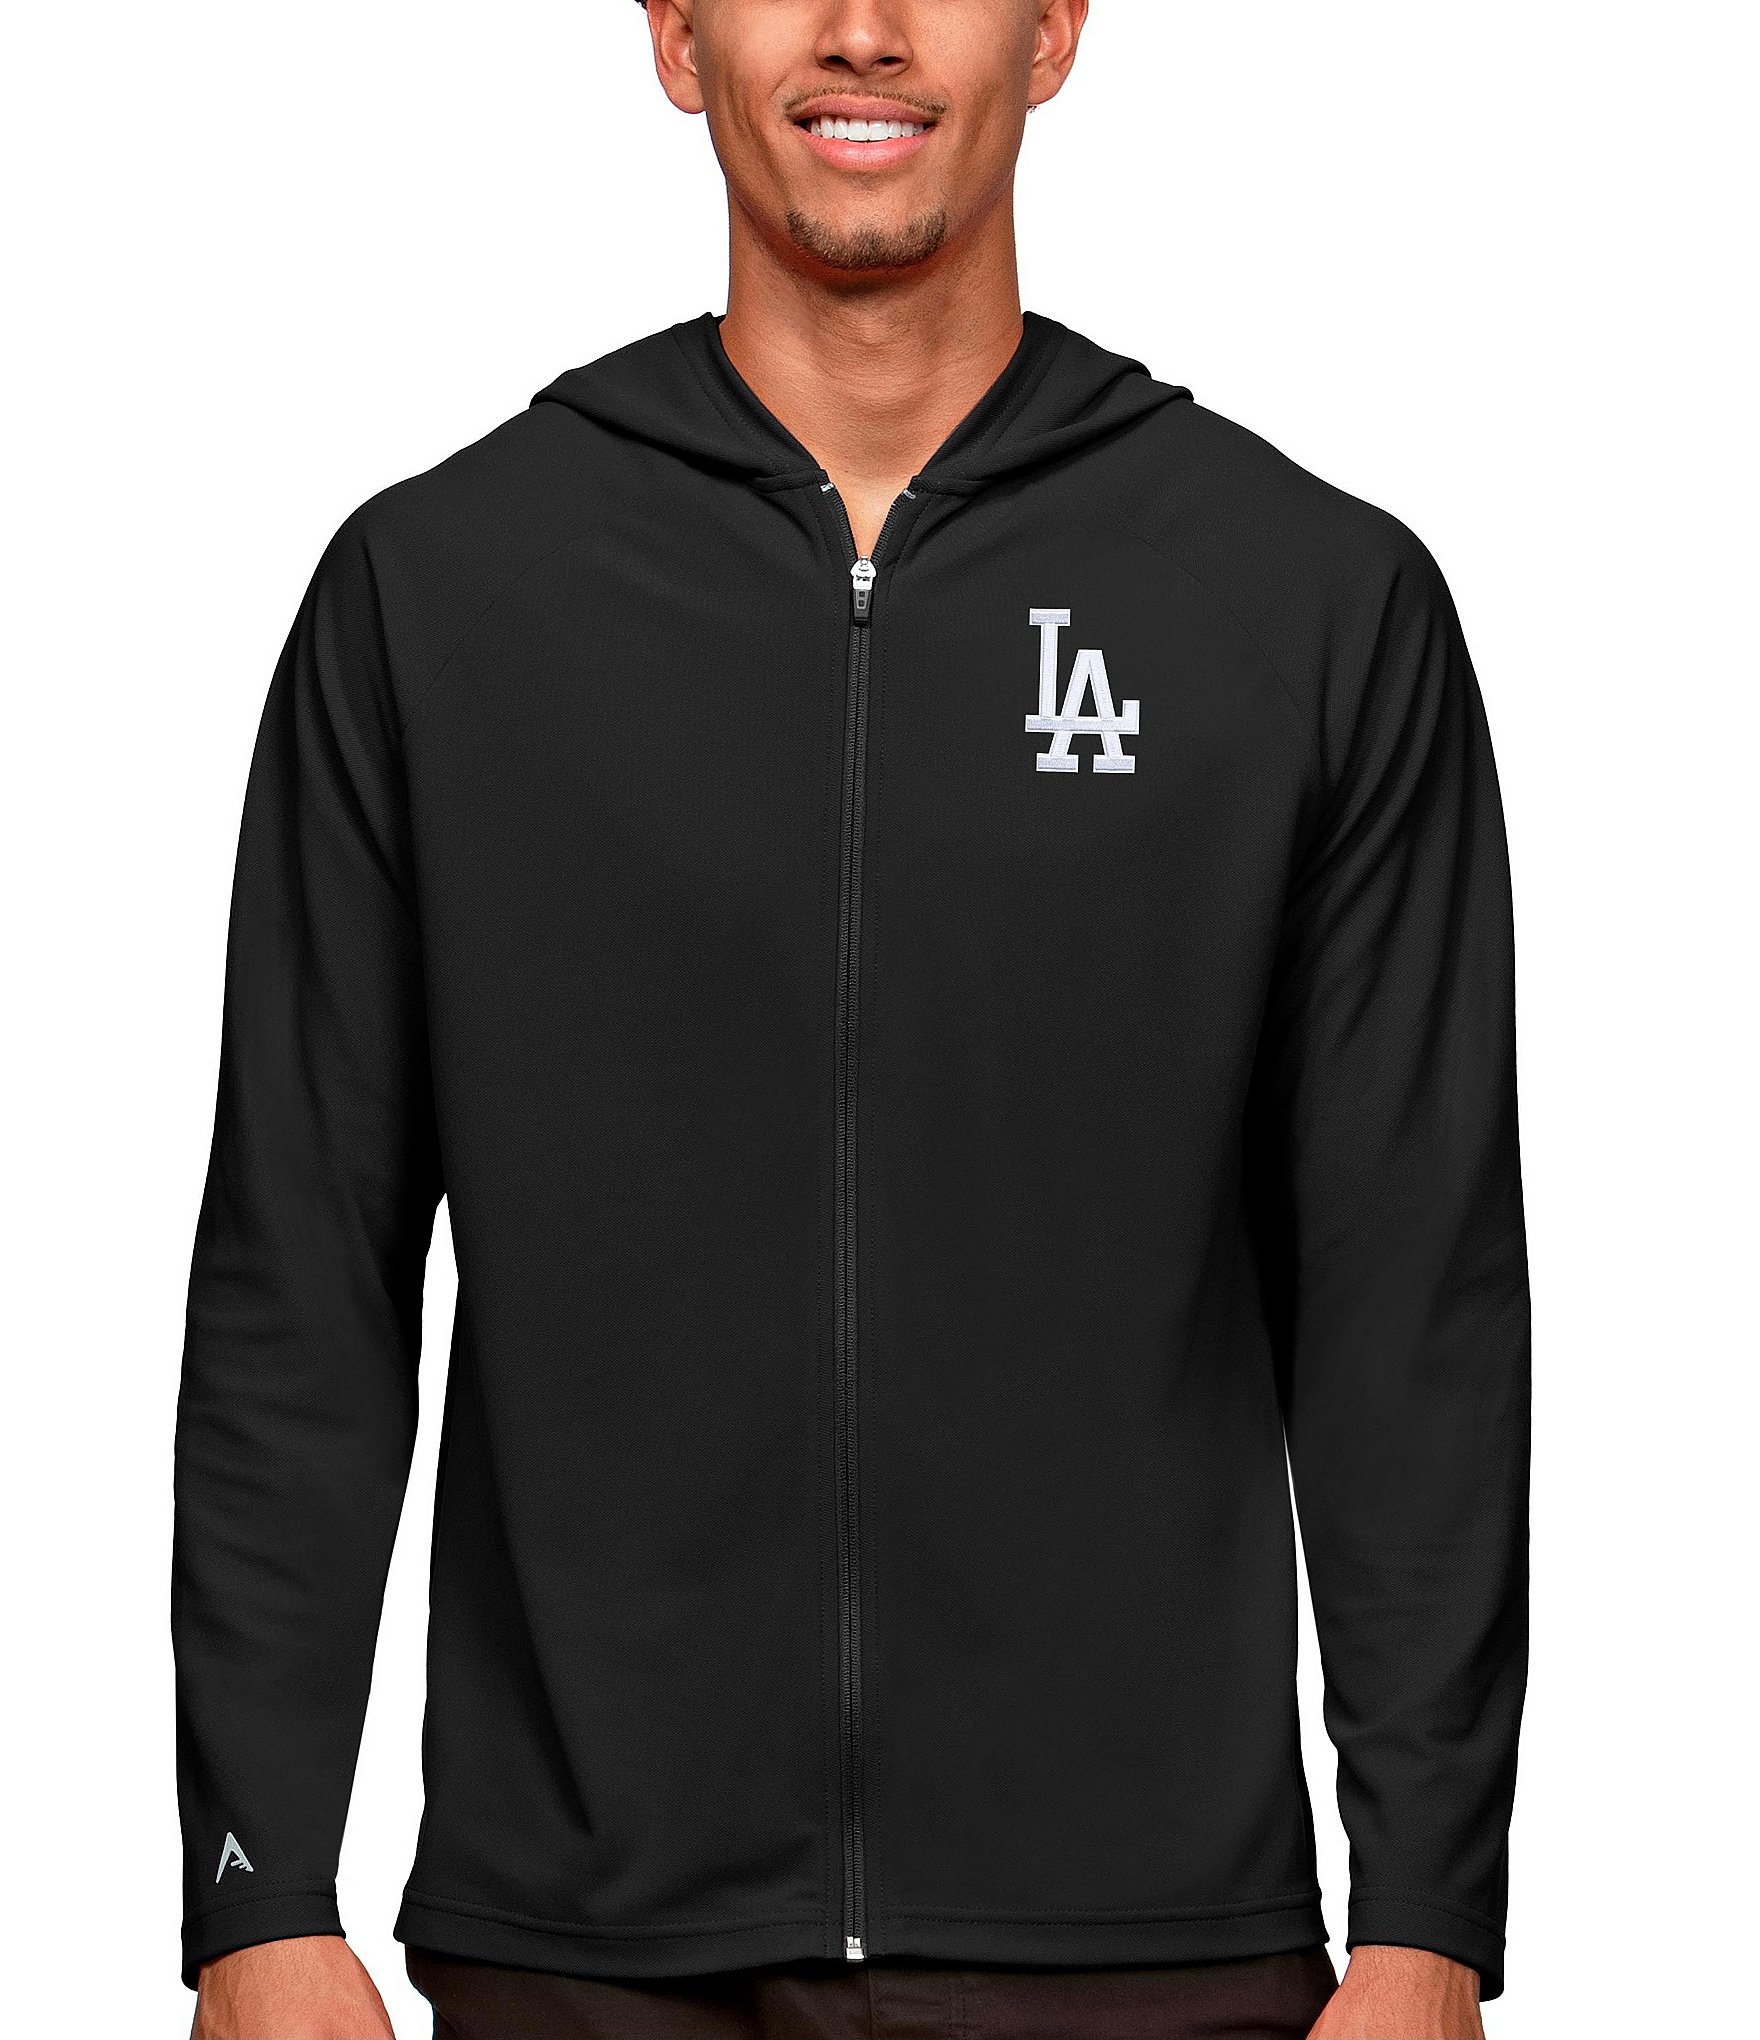 Antigua MLB Chenille Patch Victory Hoodie, Mens, S, Los Angeles Dodgers Navy/Grey